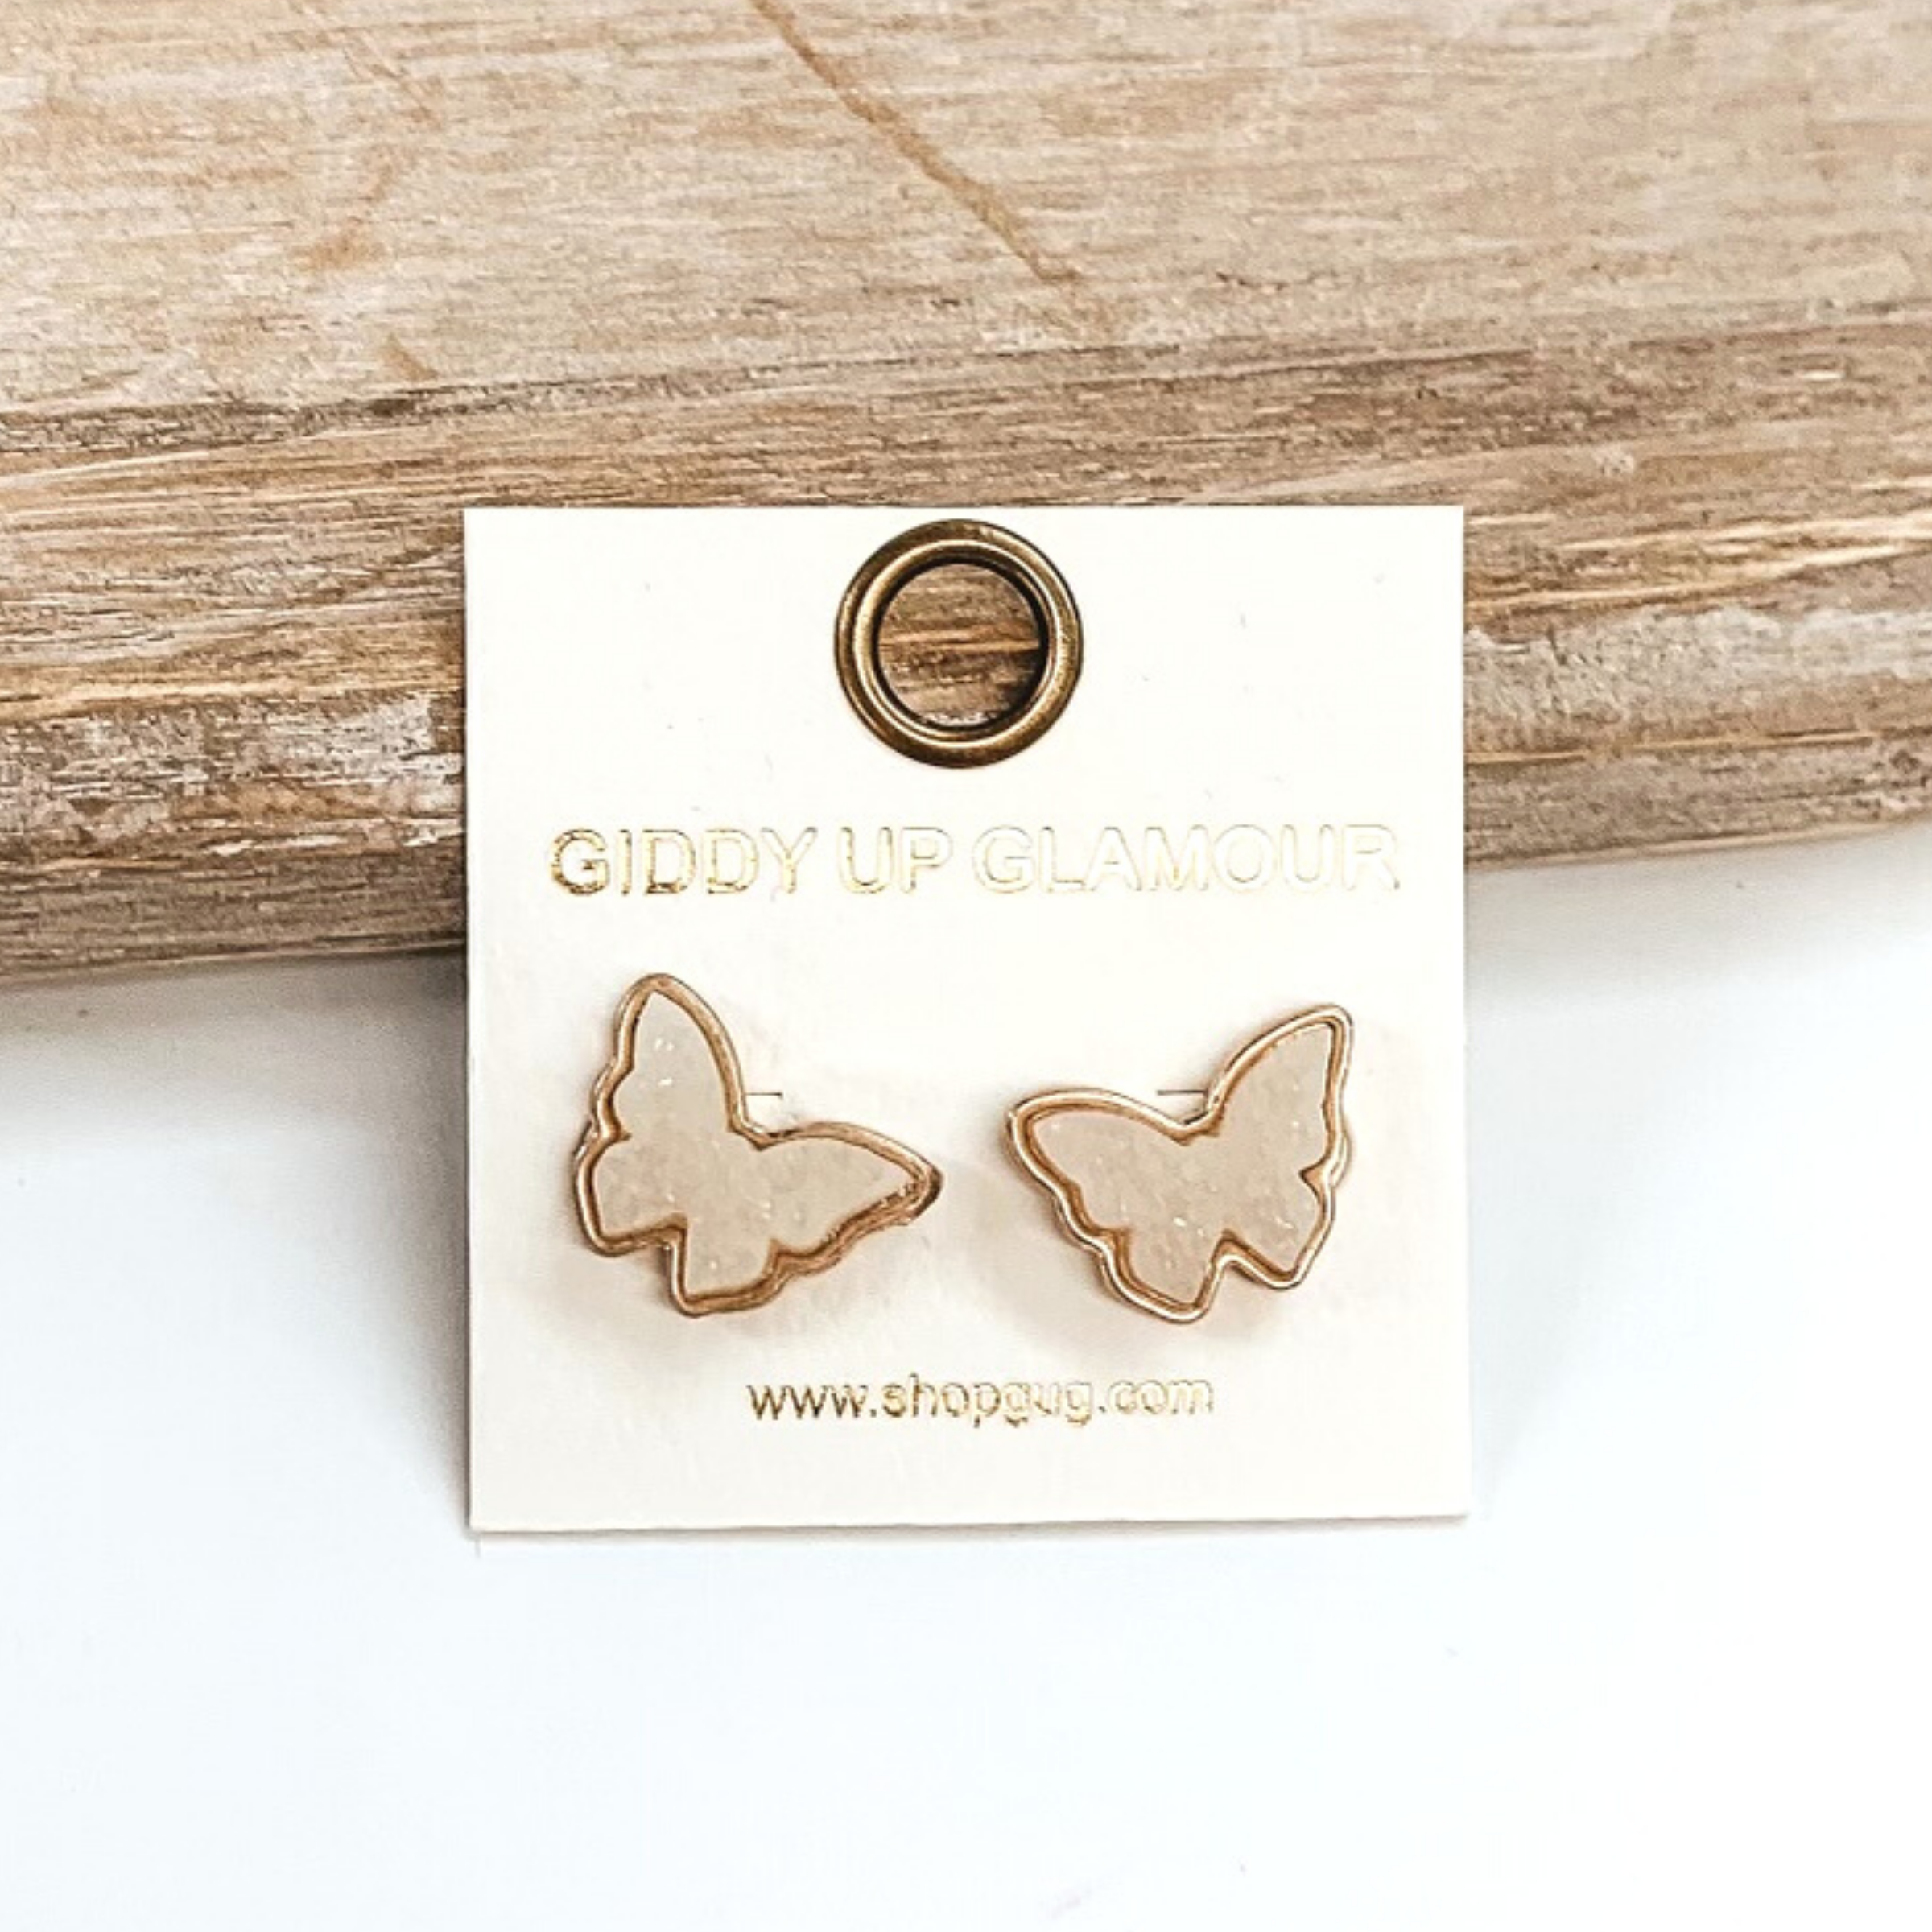 Gold post back earrings with druzy, white, butterfly shaped stone. These earrings are pictured on a white earrings holder on a white background, leaning against a tan block